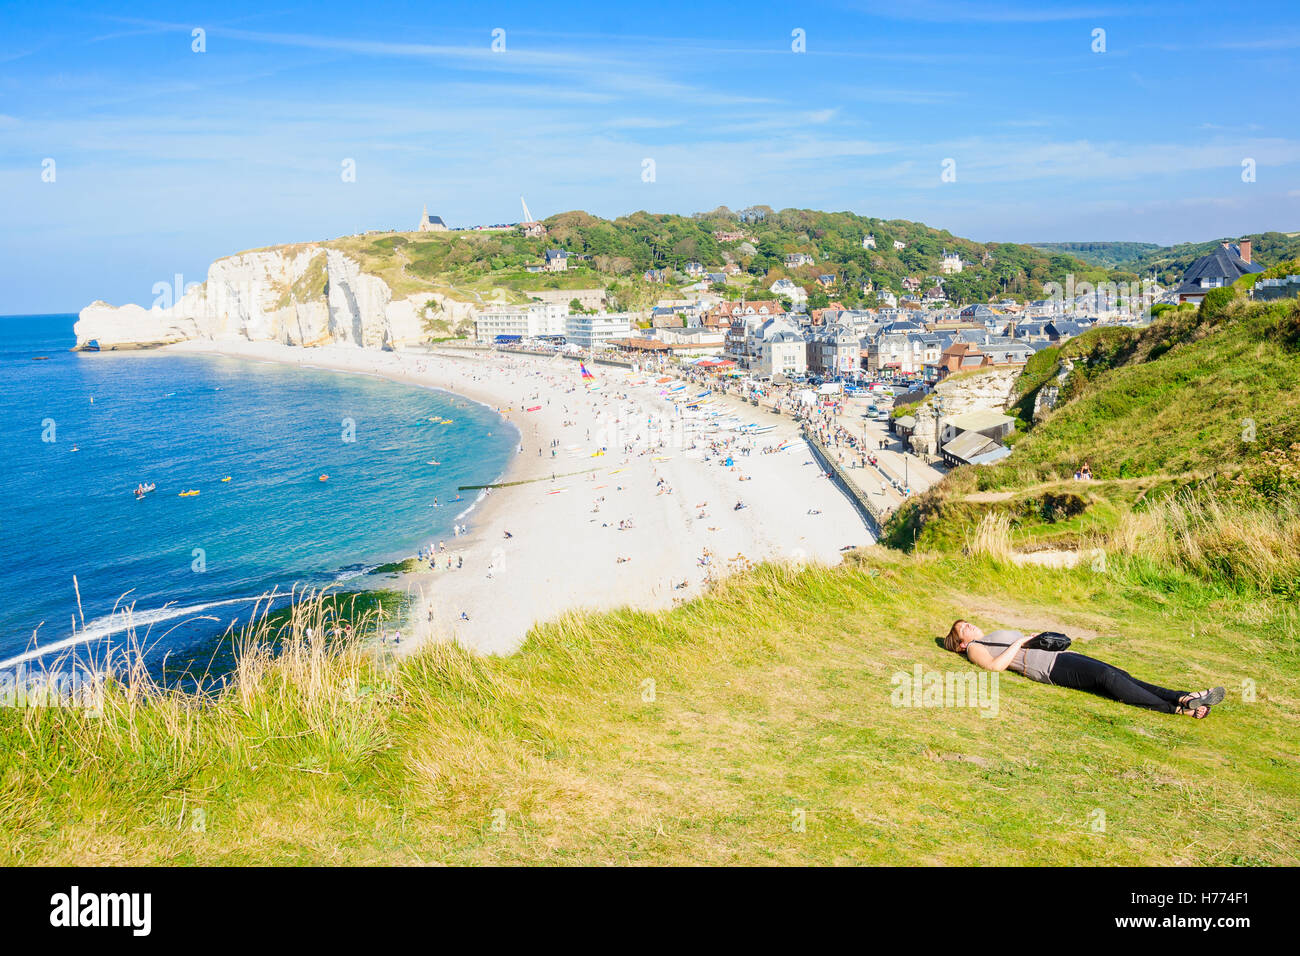 FECAMP, FRANCE - SEPTEMBER 16, 2012: Beach scene with Shore and cliffs, locals and visitors, in Fecamp, Haute-Normandie, France Stock Photo